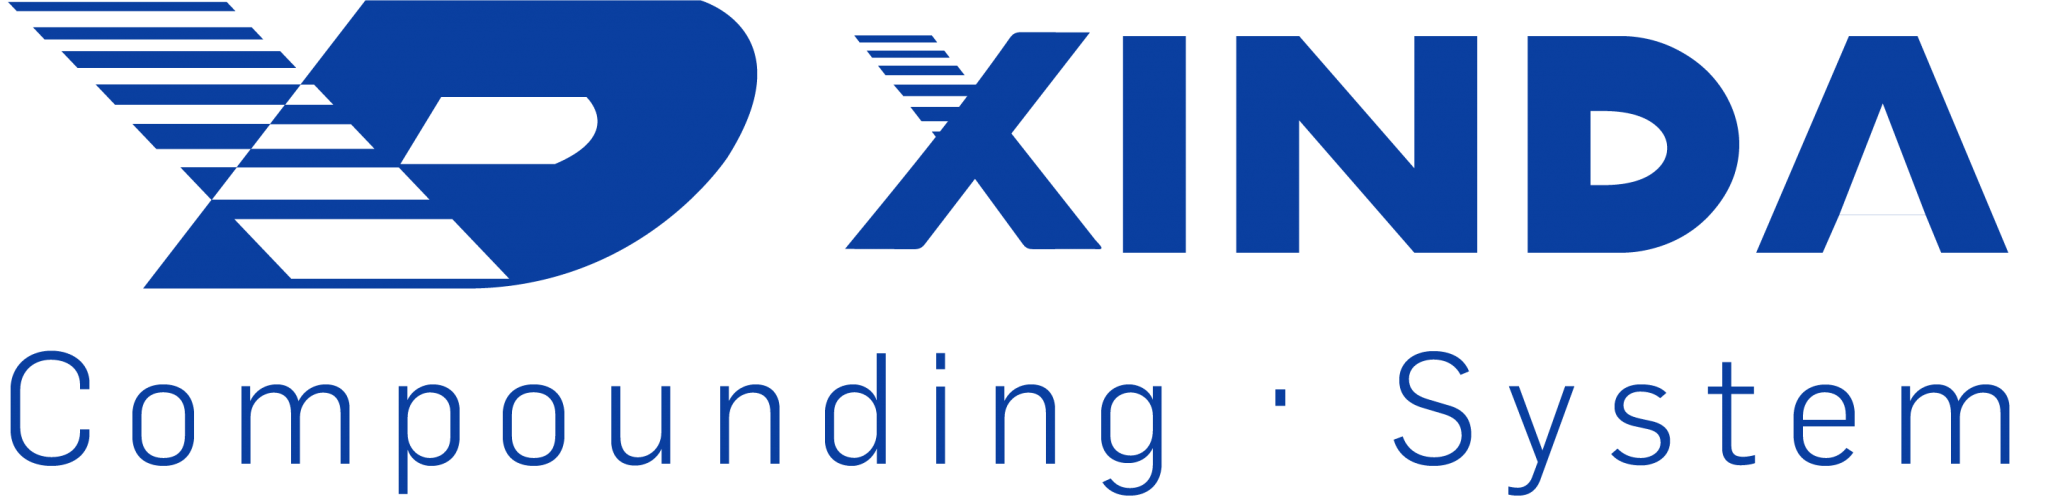 XINDA – Co-Kneader, Twin Screw Extruder, and Compounding equipment